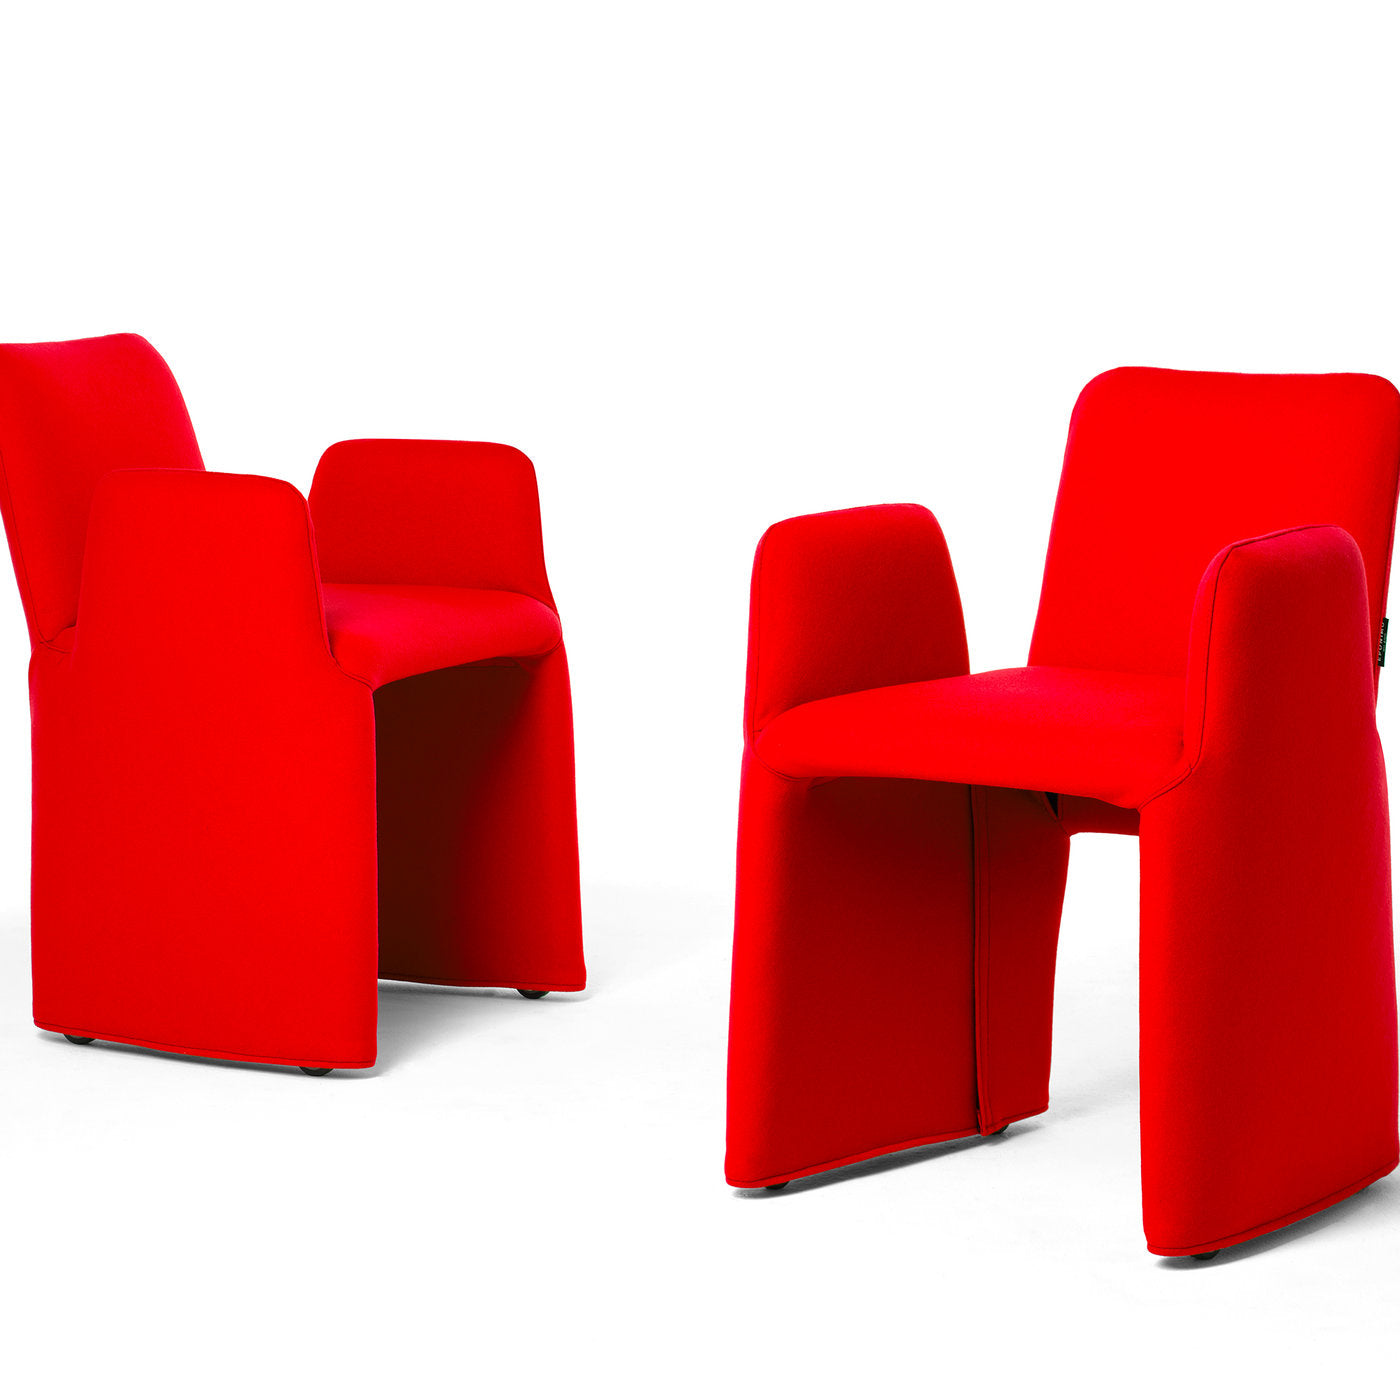 Nova OW Chair With Armrests by Federico Carandini - Alternative view 3